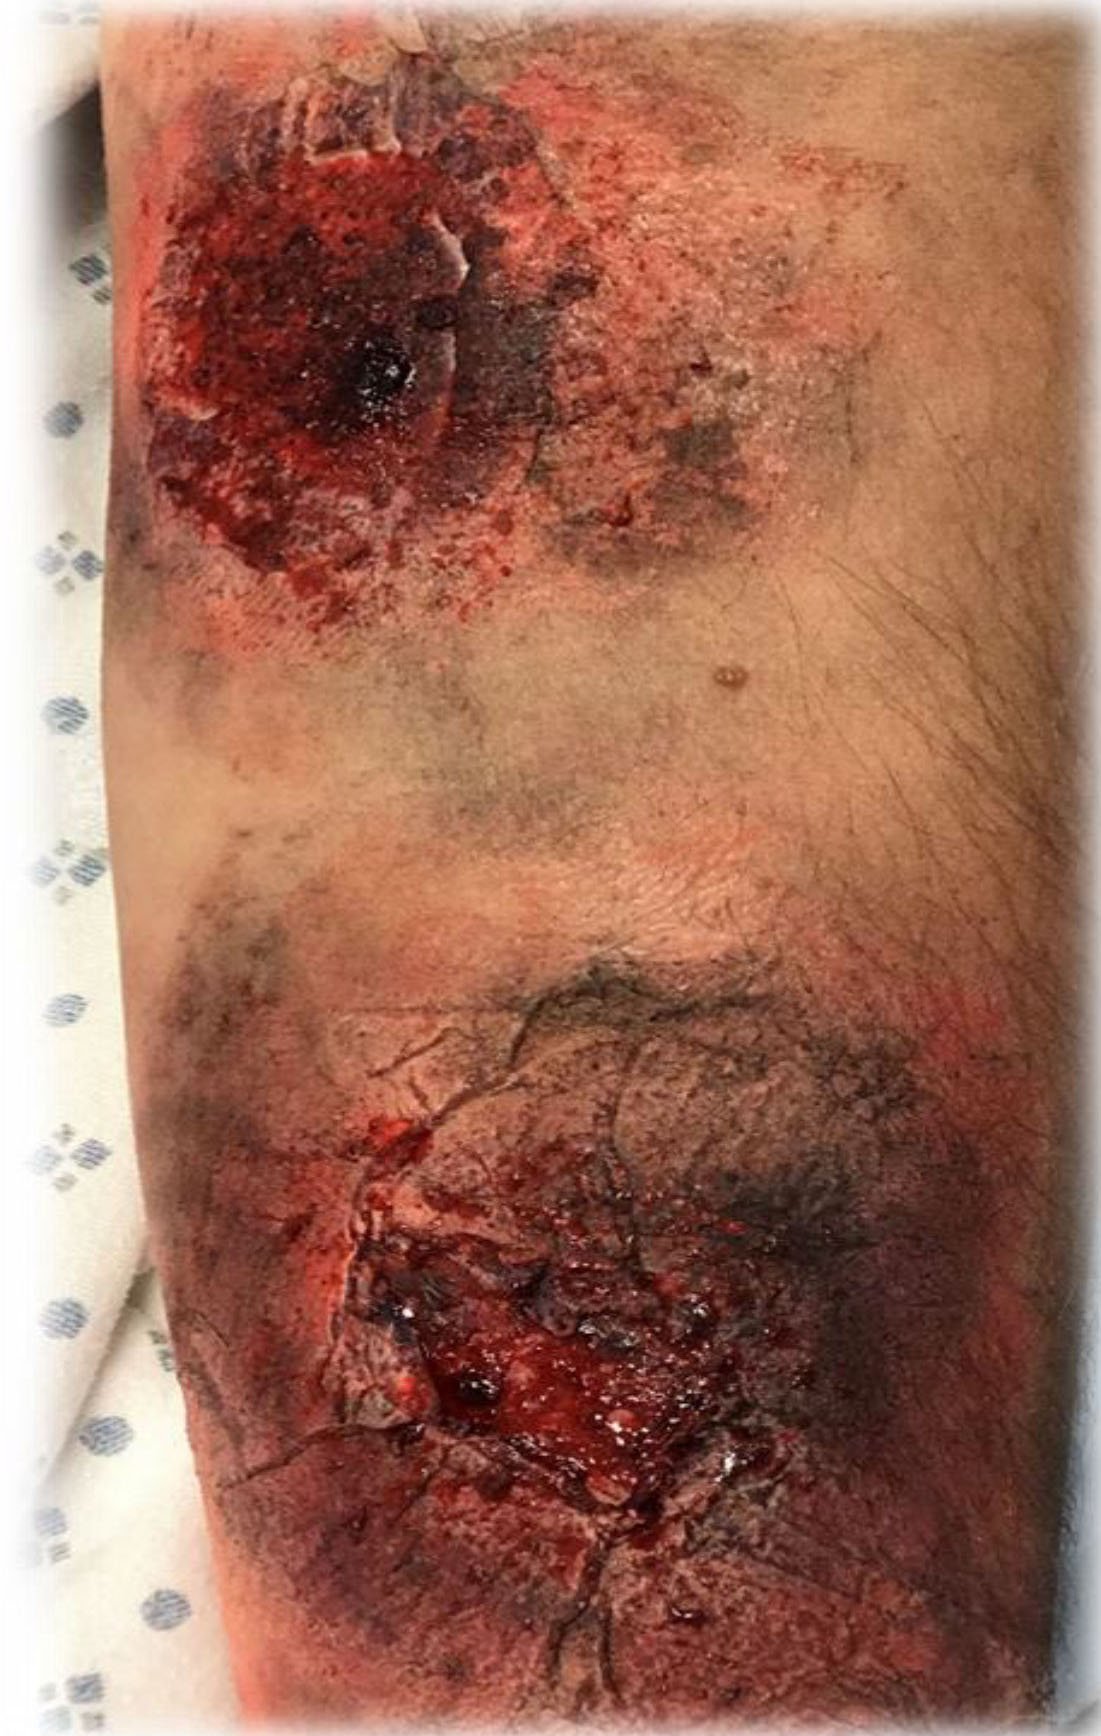 Moulage on arm